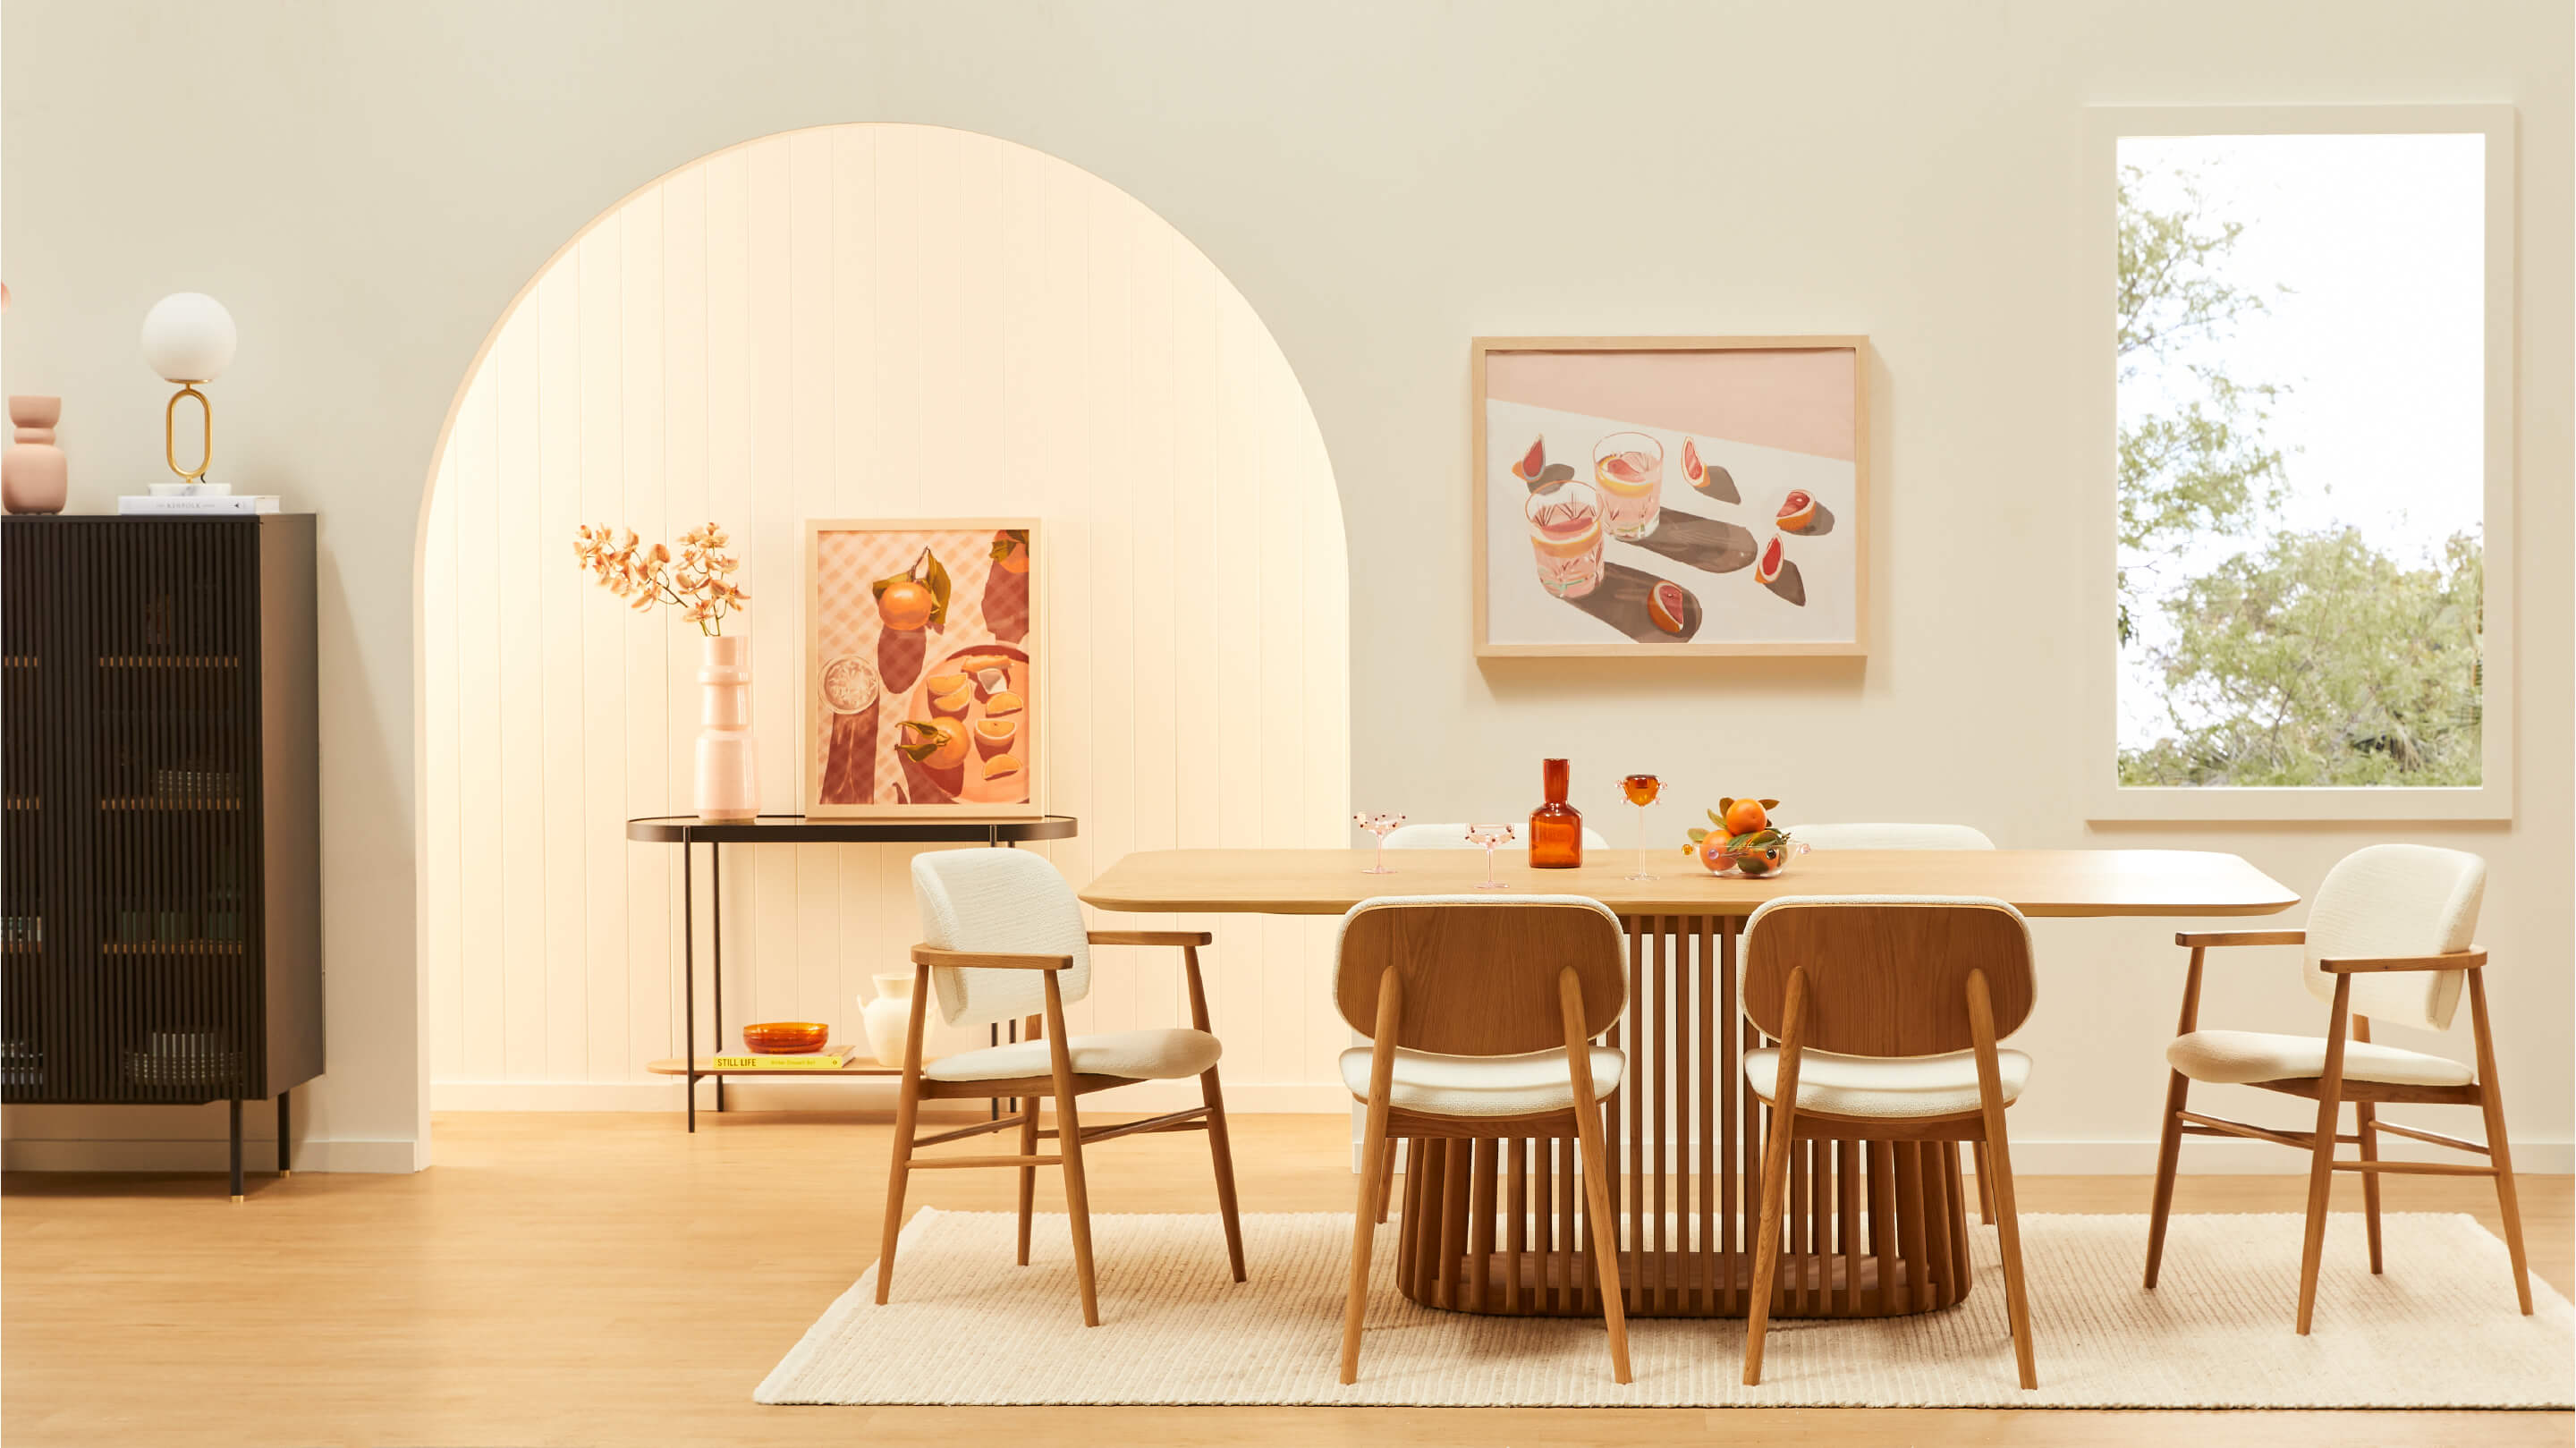 Introducing our Capsule Spring/ Summer 22 collection, the Casablanca Dining space is fresh and contemporary, full of stunning dining chairs, extendable dining tables and home decor. Shop the collection online or in-store now!